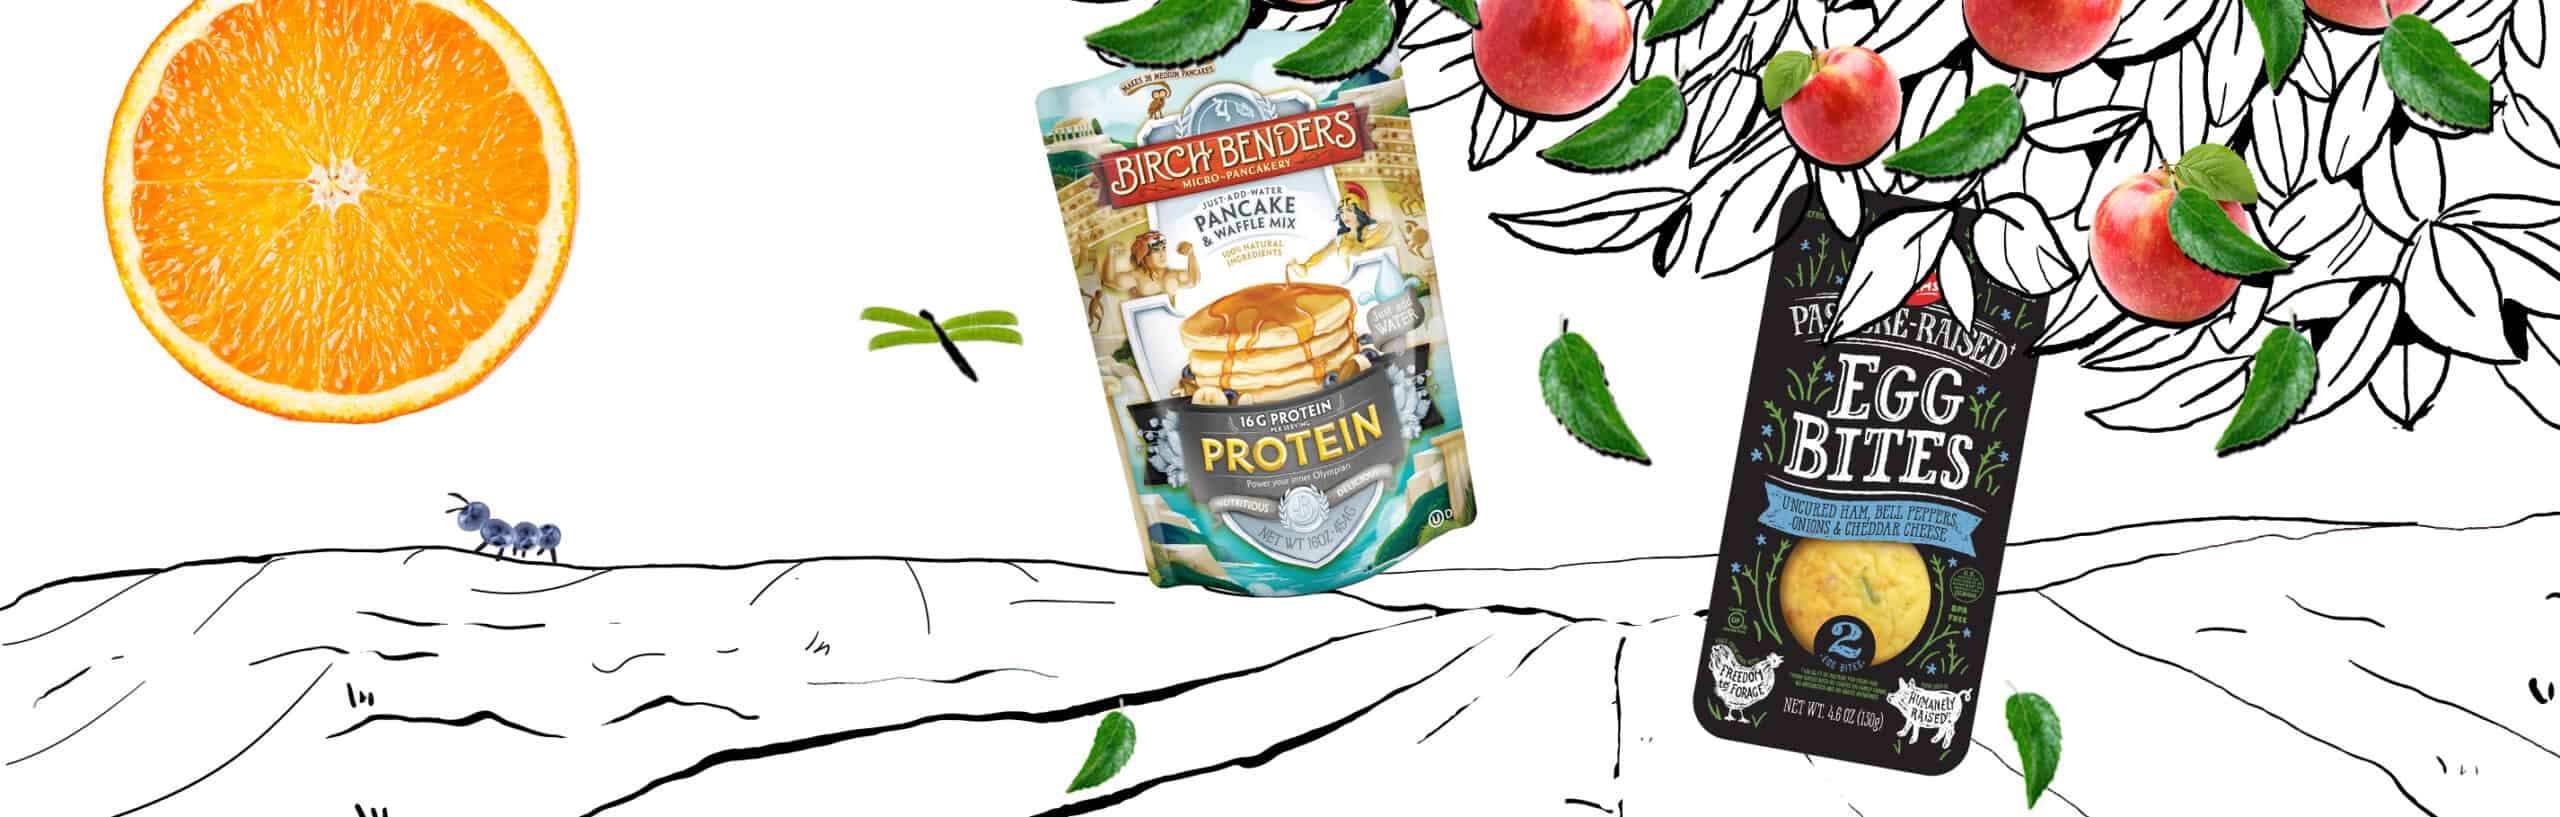 High Protein Products Illustration